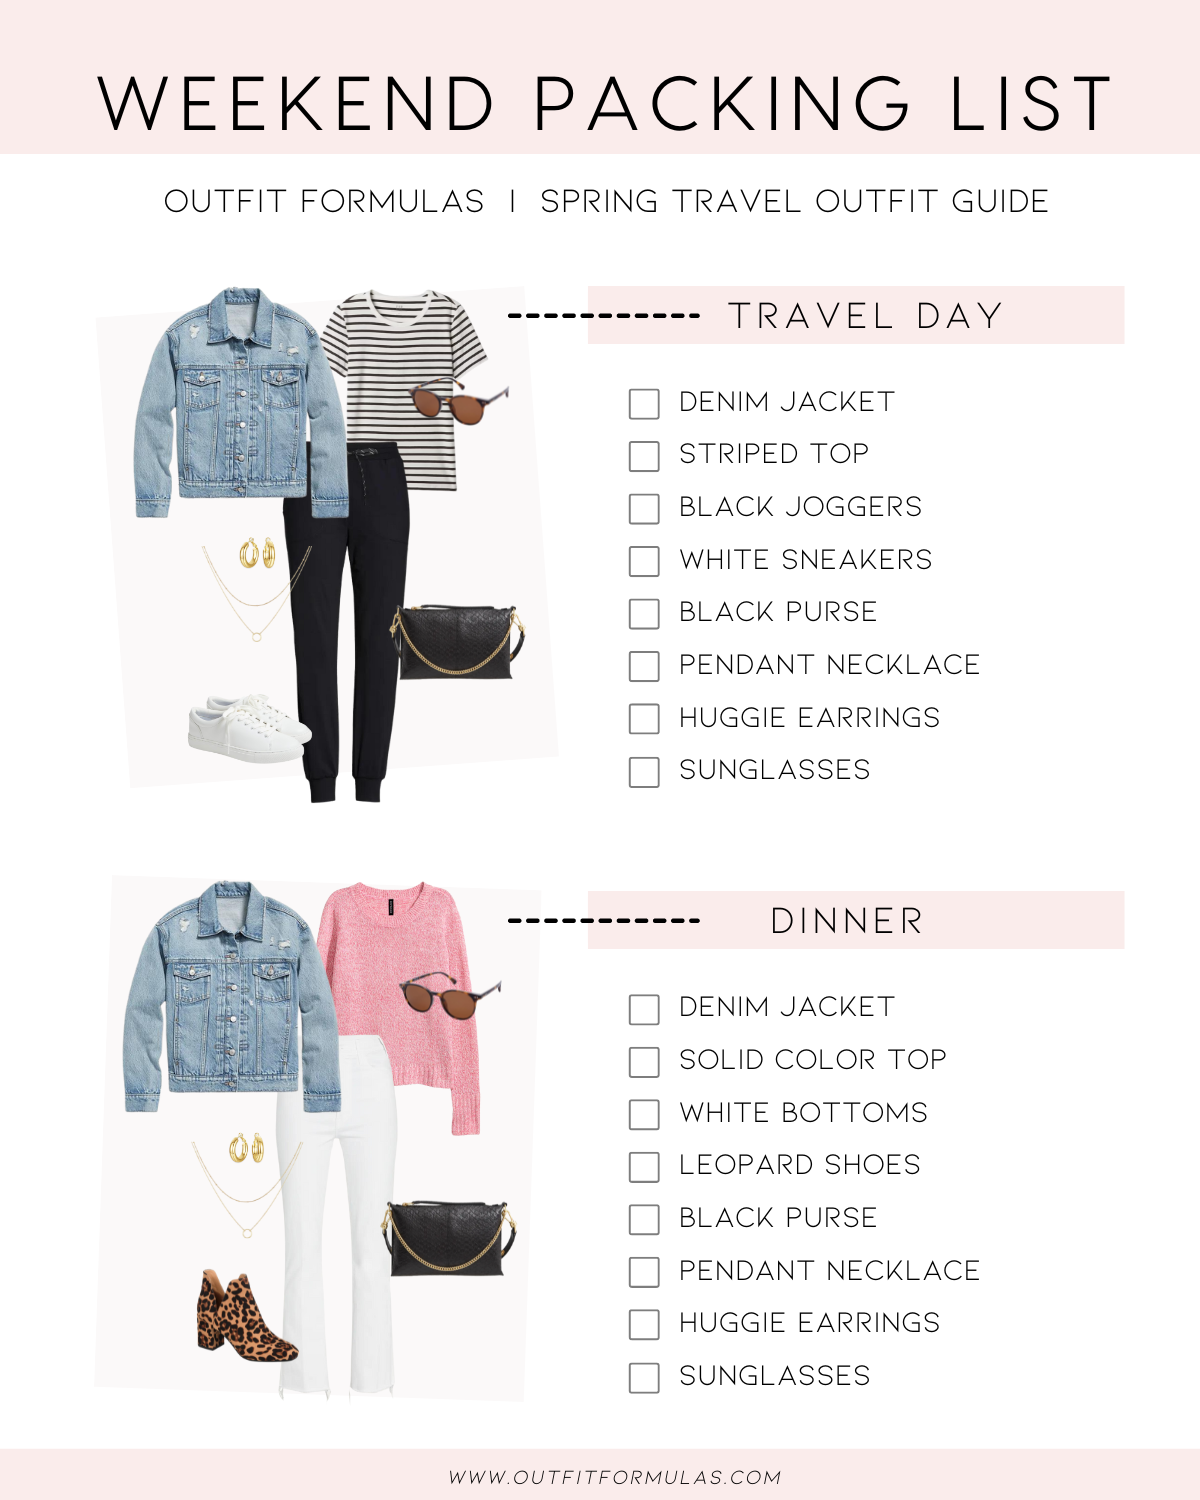 Are you planning a spring break getaway? Squeezing in a final ski trip before the snow melts away? Or maybe you're just daydreaming about your next vacation? Whatever your travel plans are, we've got your packing list ready to go. Packing for a trip can often be stressful, but it doesn't have to be. Forget the frantic last-minute packing, the 'I wish I had packed that' moments, and the suitcase chaos. We've crafted our packing lists with love and precision to ensure you're always prepared, no matter the season or occasion. Our lists are carefully curated to include everything from cozy winter essentials to breezy summer must-haves. But we don't just tell you what to pack; we help you maximize your wardrobe's versatility. Our packing lists allow you to mix and match pieces to create multiple outfits, making packing efficient and cost-effective. Whether you're a style maven in her 30's or a fashionista in her 70's, our packing guides are designed to help you express your personal style while ensuring comfort and practicality. After all, travel is about exploring new places, creating memories, and feeling fabulous doing it! Ready to say goodbye to packing jitters? Become a member today and get instant access to our Weekend Getaway Packing Lists. Already a member? Simply log in to access your packing lists. Become a member: https://outfitformulas.com/product/all-access-pass/ Already a member? Log in here: https://members.outfitformulas.com/login Safe and stylish travels, everyone! And while you're planning your next adventure, keep an eye out for our upcoming Spring 2024 Outfit Guide. Launching on March 15th at 9AM CT, it's packed with fresh, seasonal looks that we can't wait to share with you! Stay fabulous, Your Fashion Friends at Outfit Formulas